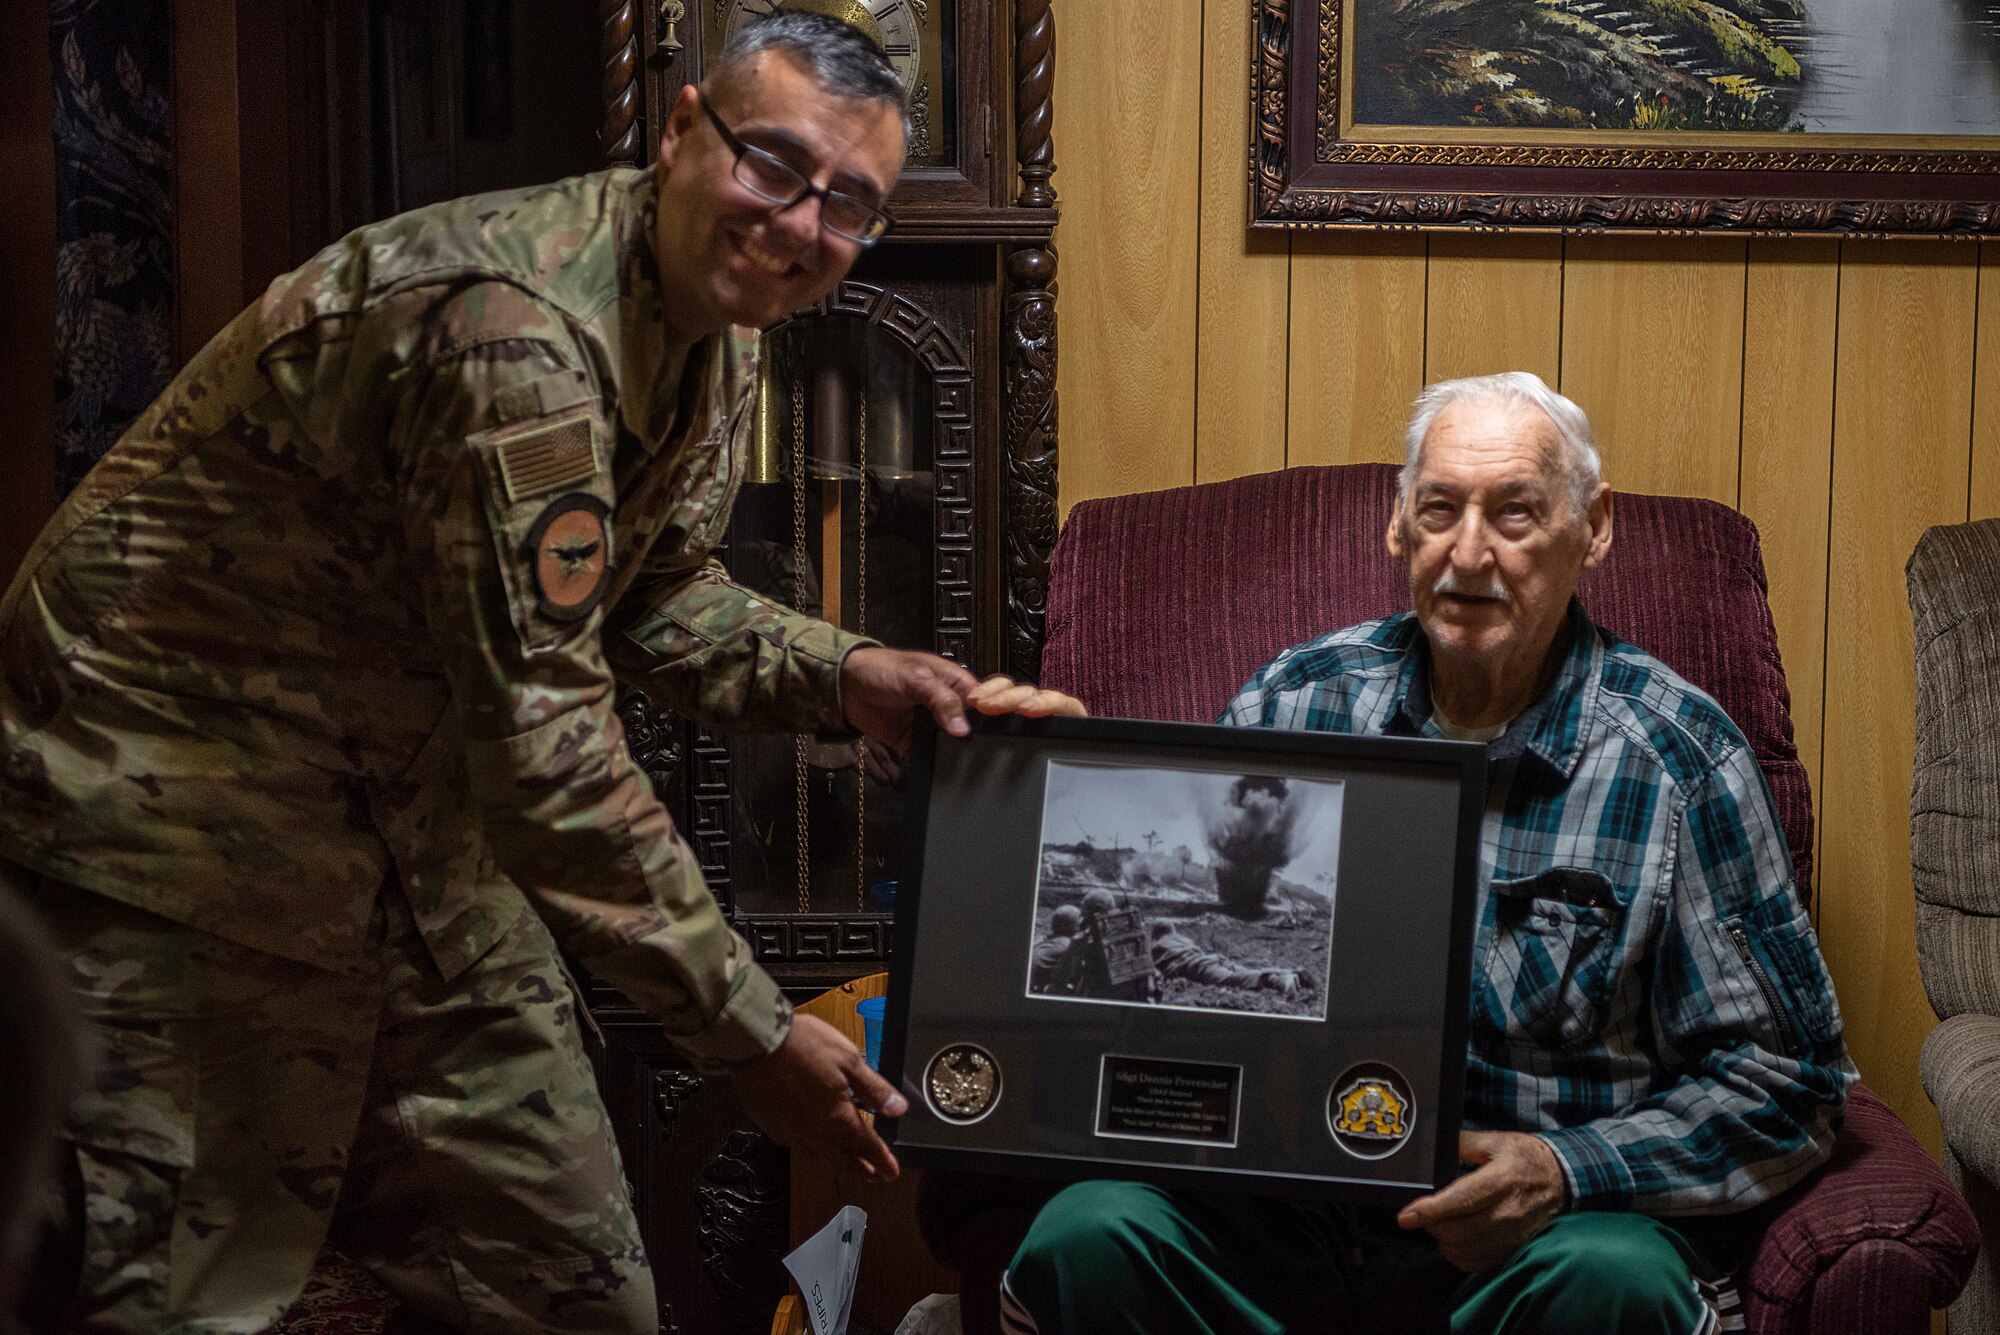 Retired U.S. Air Force Staff Sergeant Dennis Provencher, airborne and ground radio operator, right, talks with a group of Airmen including Lt. Col. Denial Waid, 18th Communications Squadron commander, left, about how much has changed since Provencher initially joined in 1951 on Dec. 23, 2019, in Okinawa City, Okinawa. Provencher is a Guinness Book of World Records holder for most amount of blood donated. (U.S. Air Force Photo by Airman 1st Class Rebeckah Medeiros)